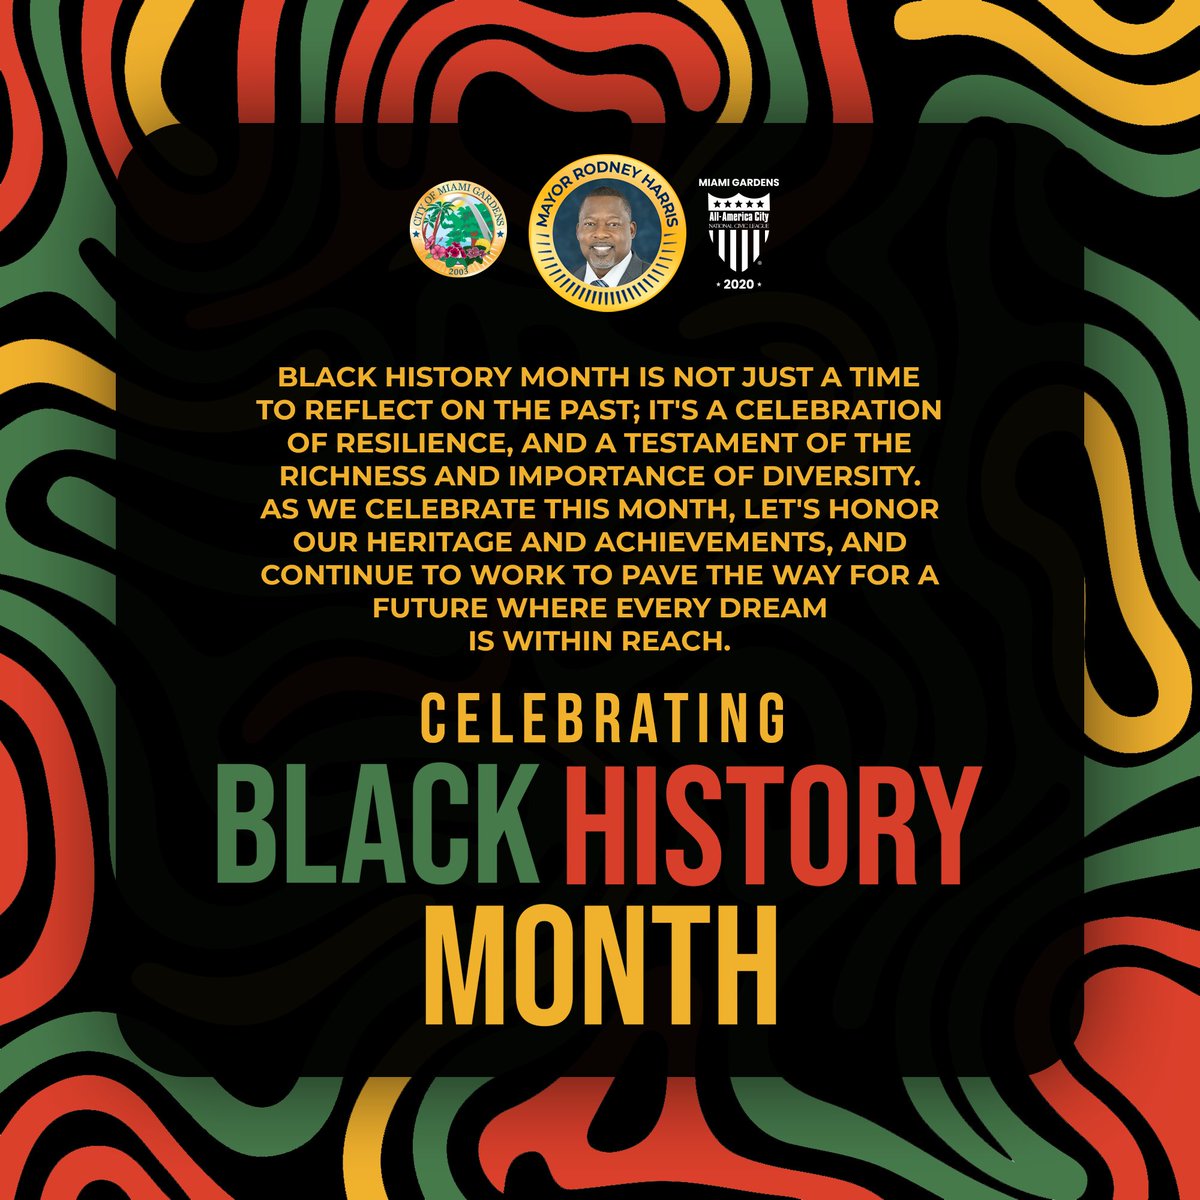 Let’s honor our heritage and achievements and continue to pave the way for a future where every dream is within reach. HAPPY BLACK HISTORY MONTH! #JITG2024 #blackhistorymonth